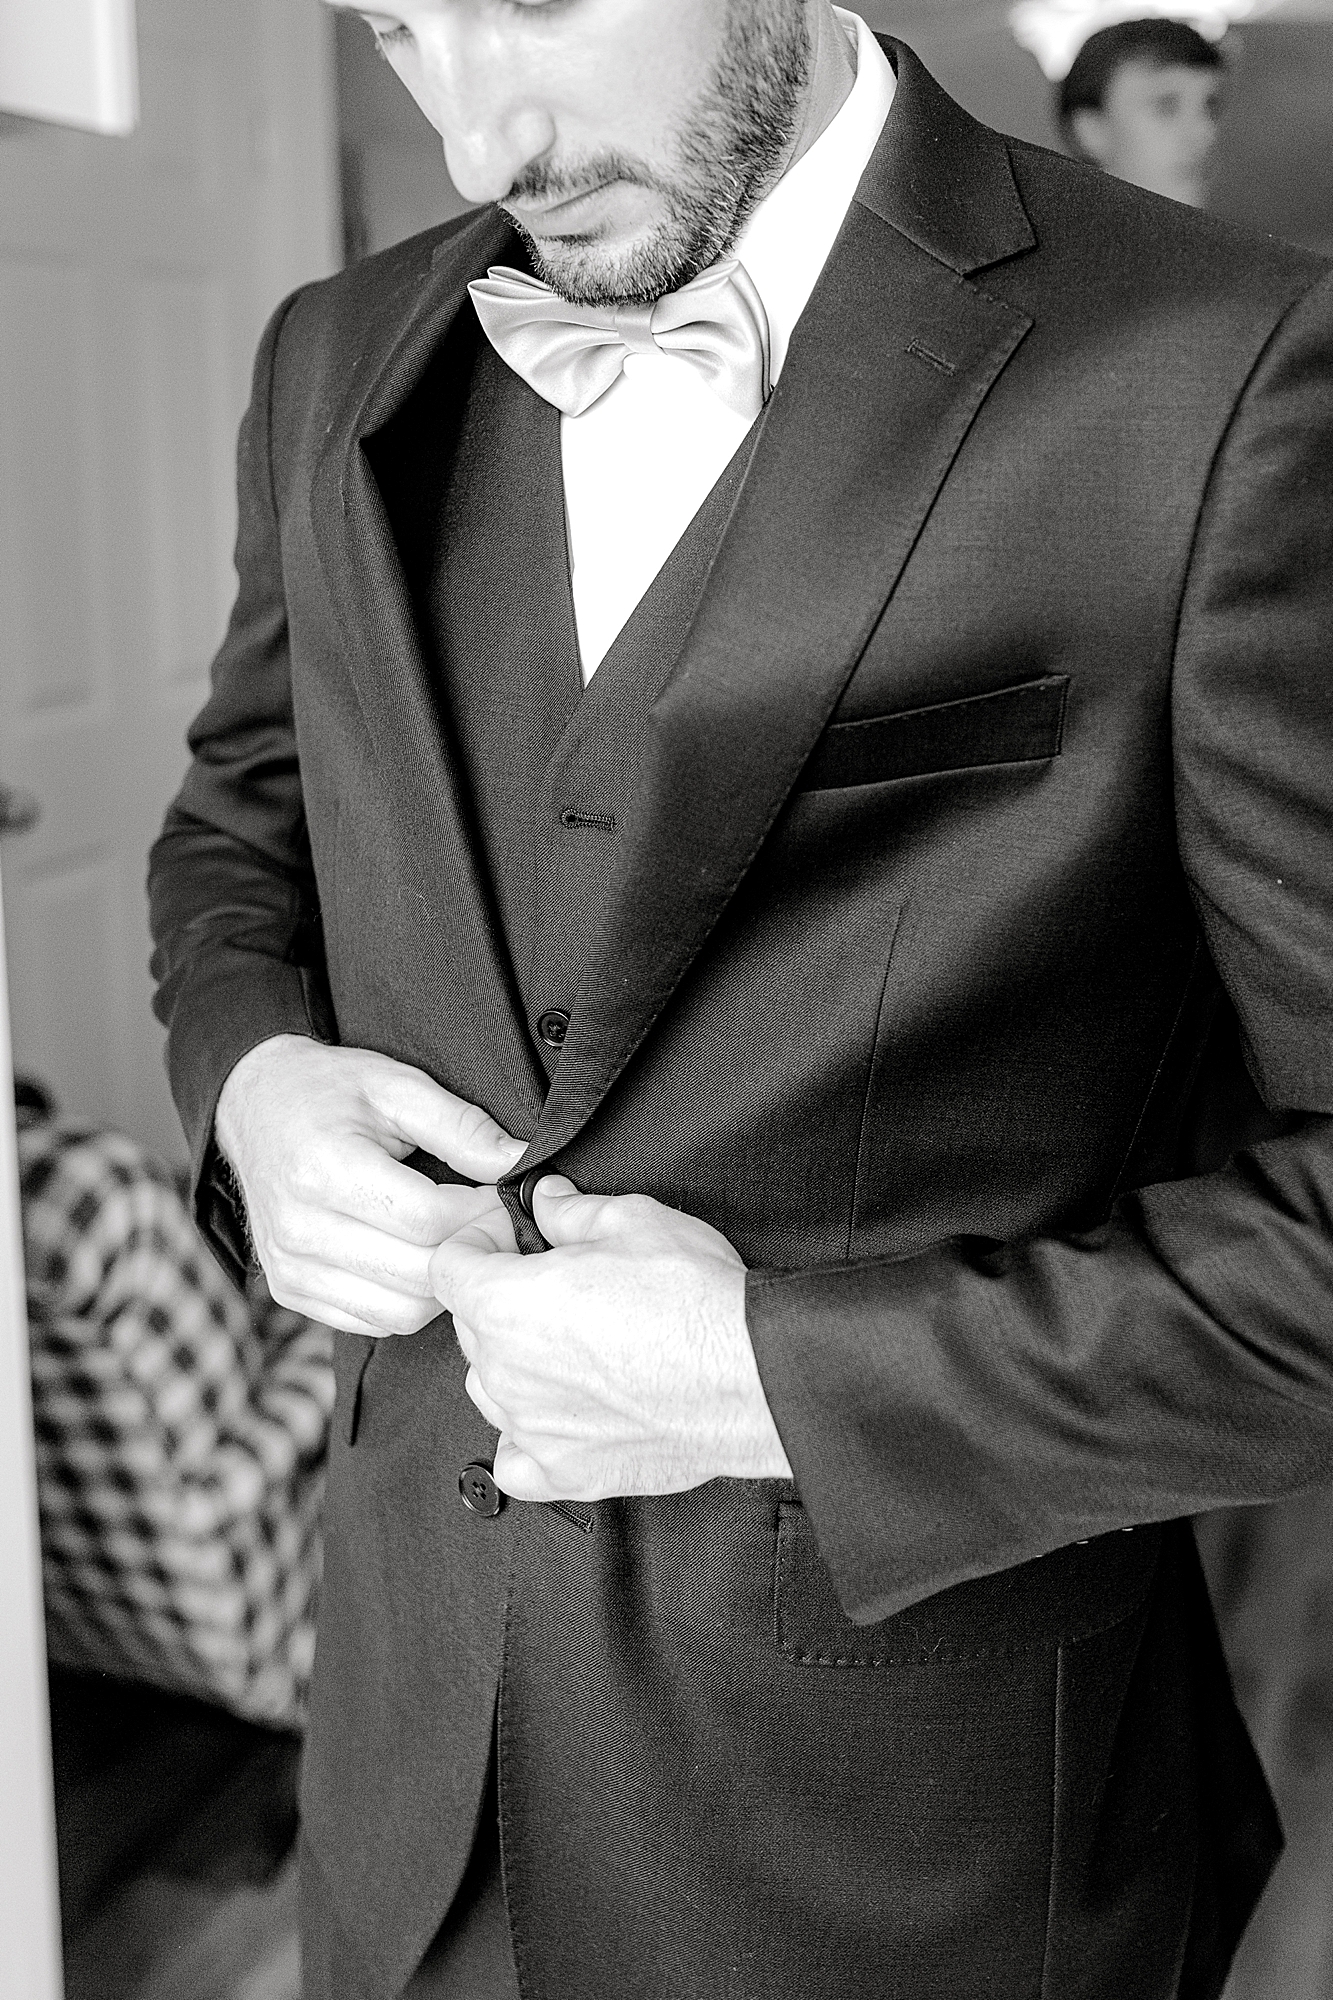 Groom buttoning tux for wedding.